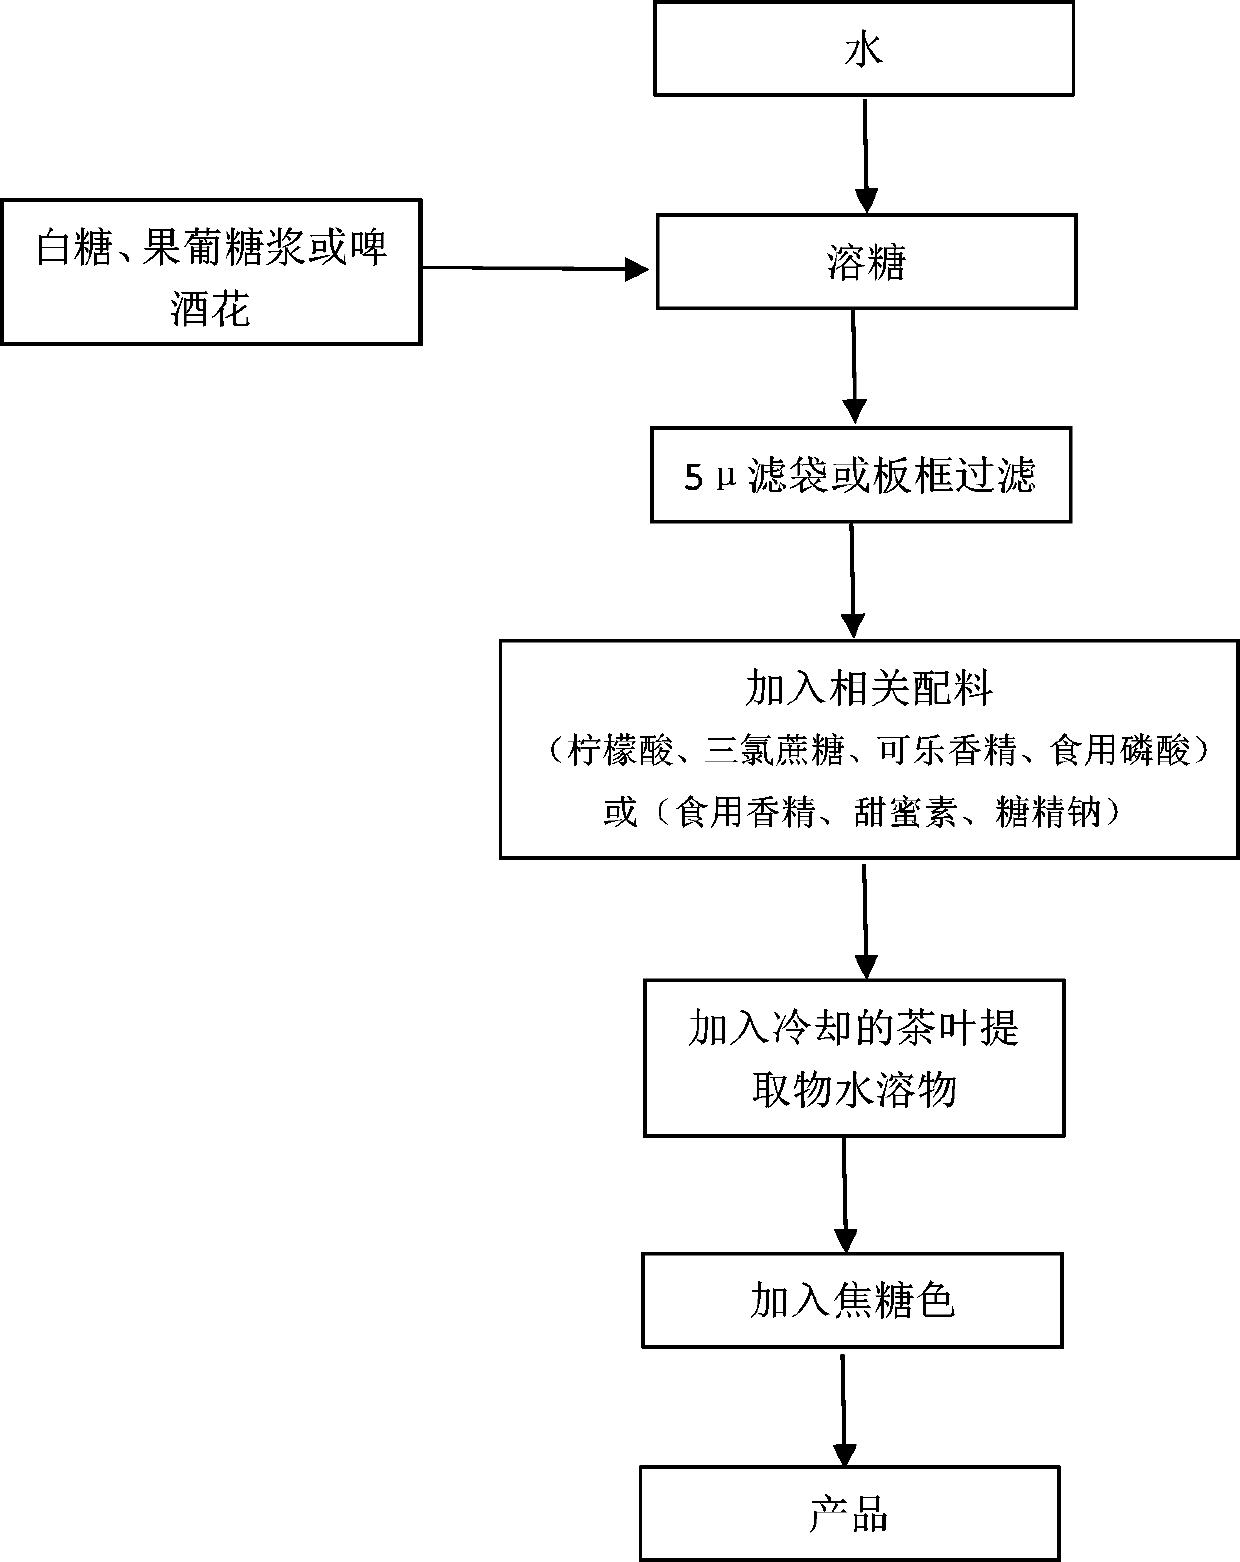 Technical flow process for making tea beverage